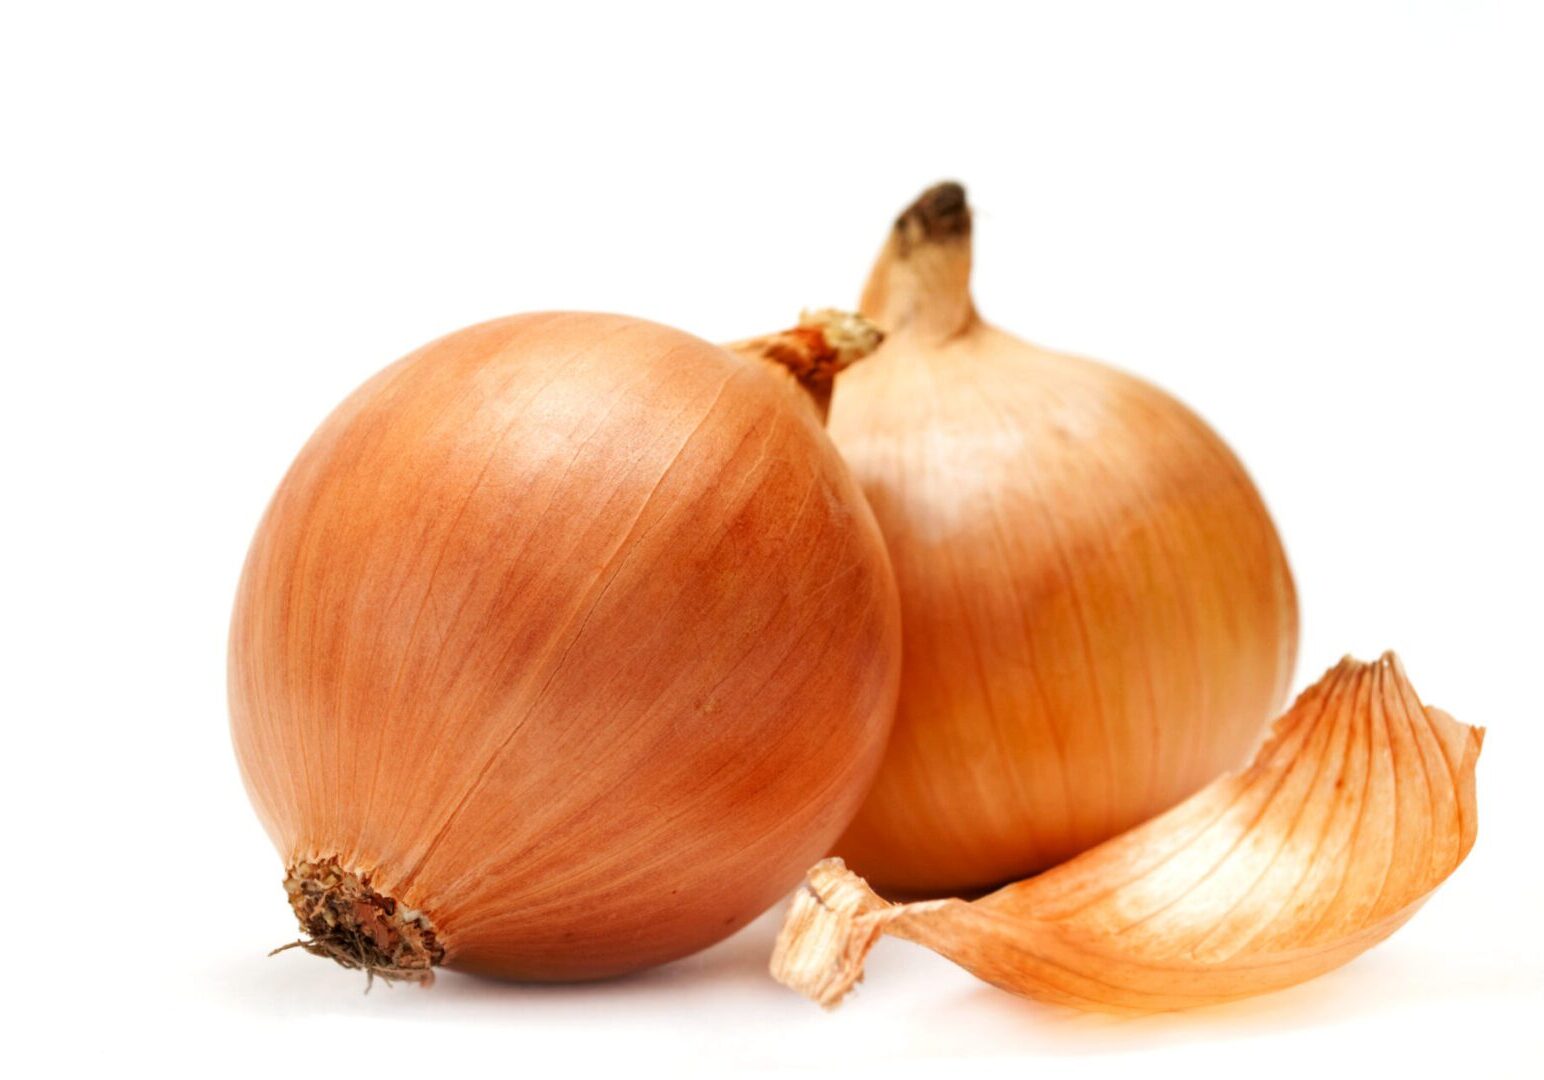 Mellow onions on a white background